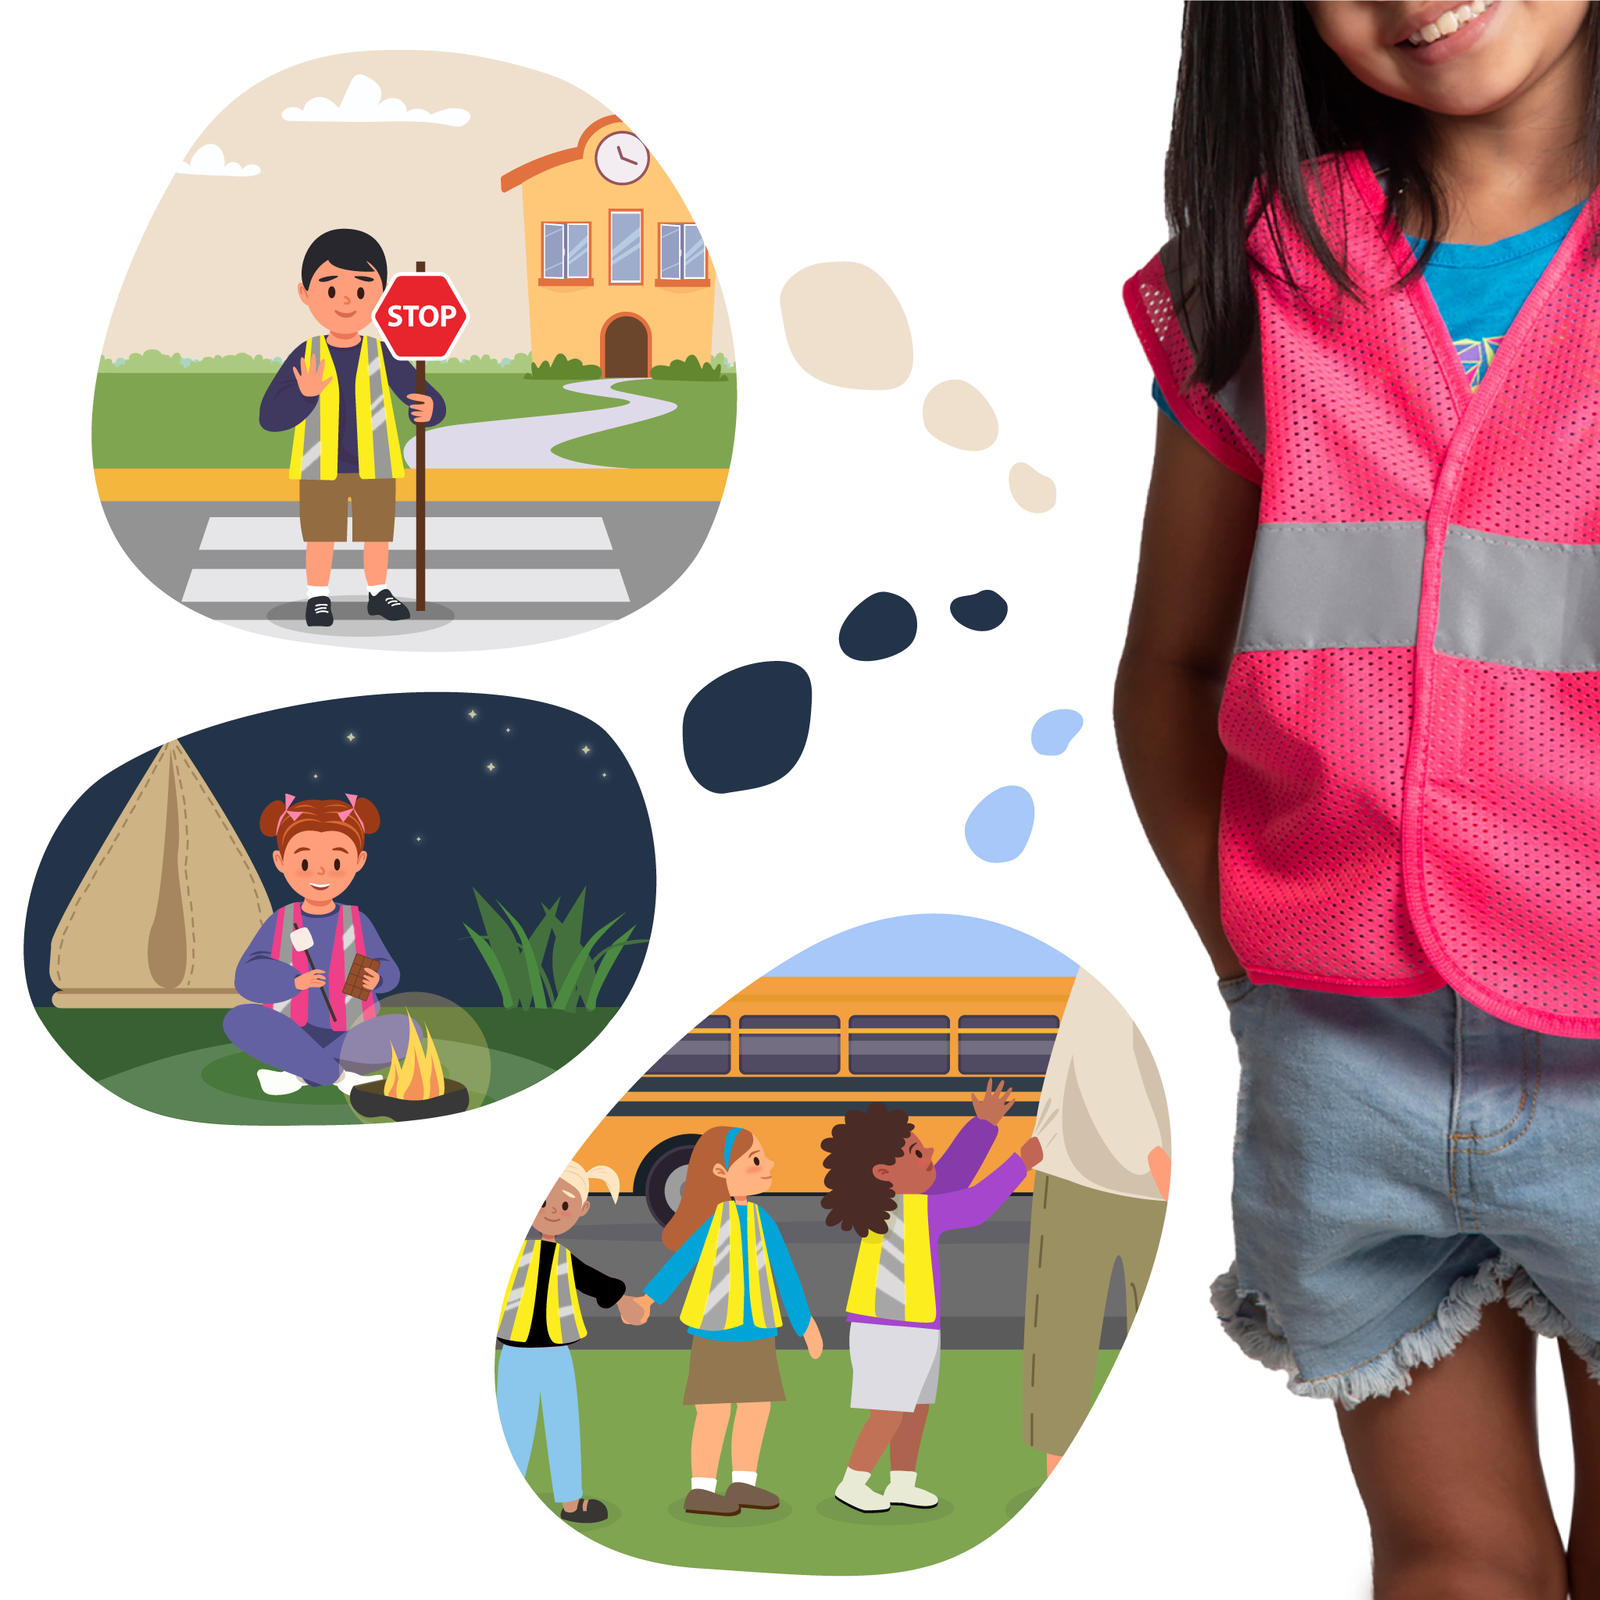 Reflective pink safety vest for girls for school and outdoor activities